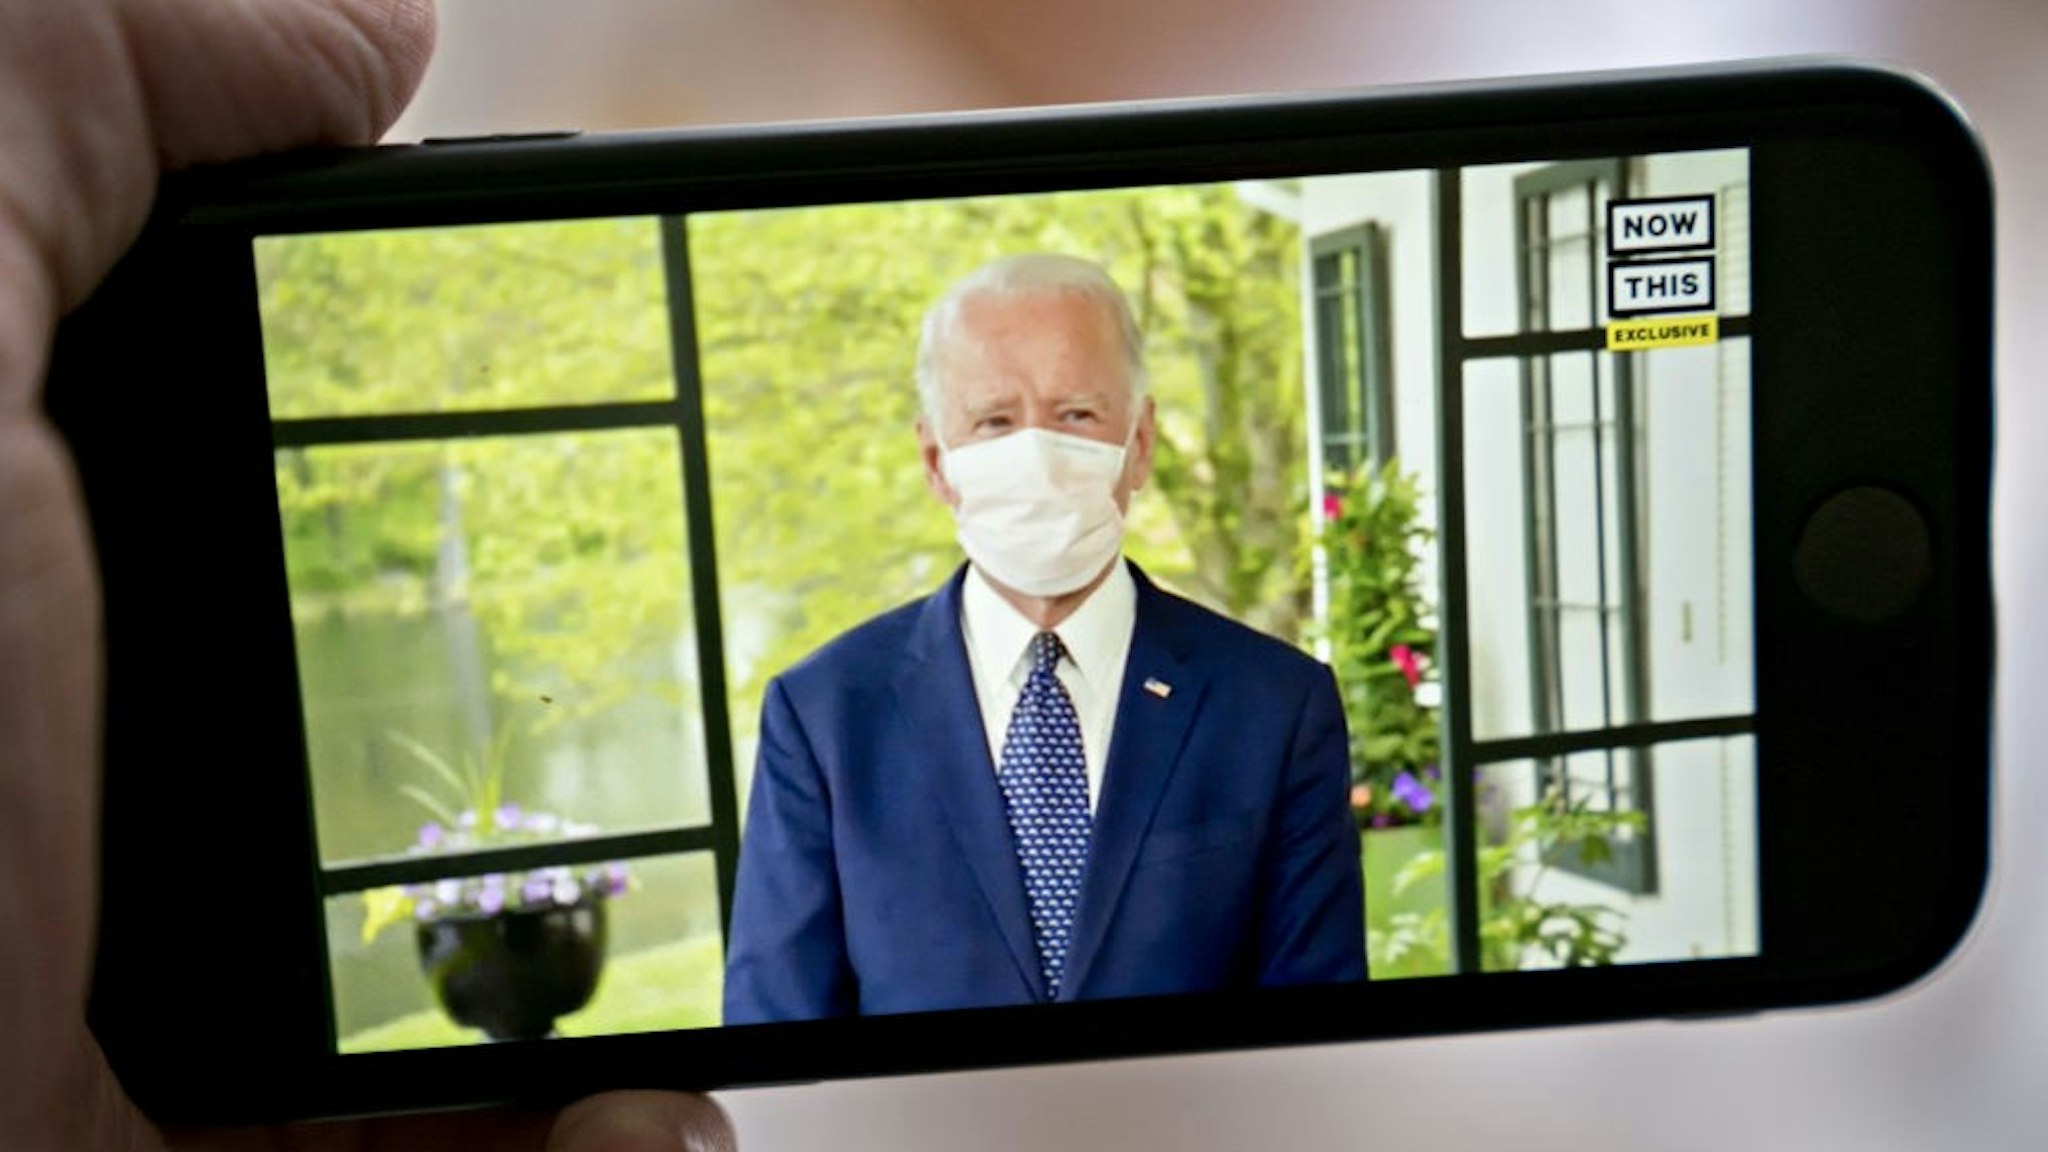 Former Vice President Joe Biden, presumptive Democratic presidential nominee, wears a protective mask during a NowThis economic address seen on a smartphone in Arlington, Virginia, U.S., on Friday, May 8, 2020. A super political action committee backing Joe Biden will launch a $10 million television ad campaign touting the presumptive Democratic nominee's leadership on the economic recovery after the 2008 financial crisis. Photographer: